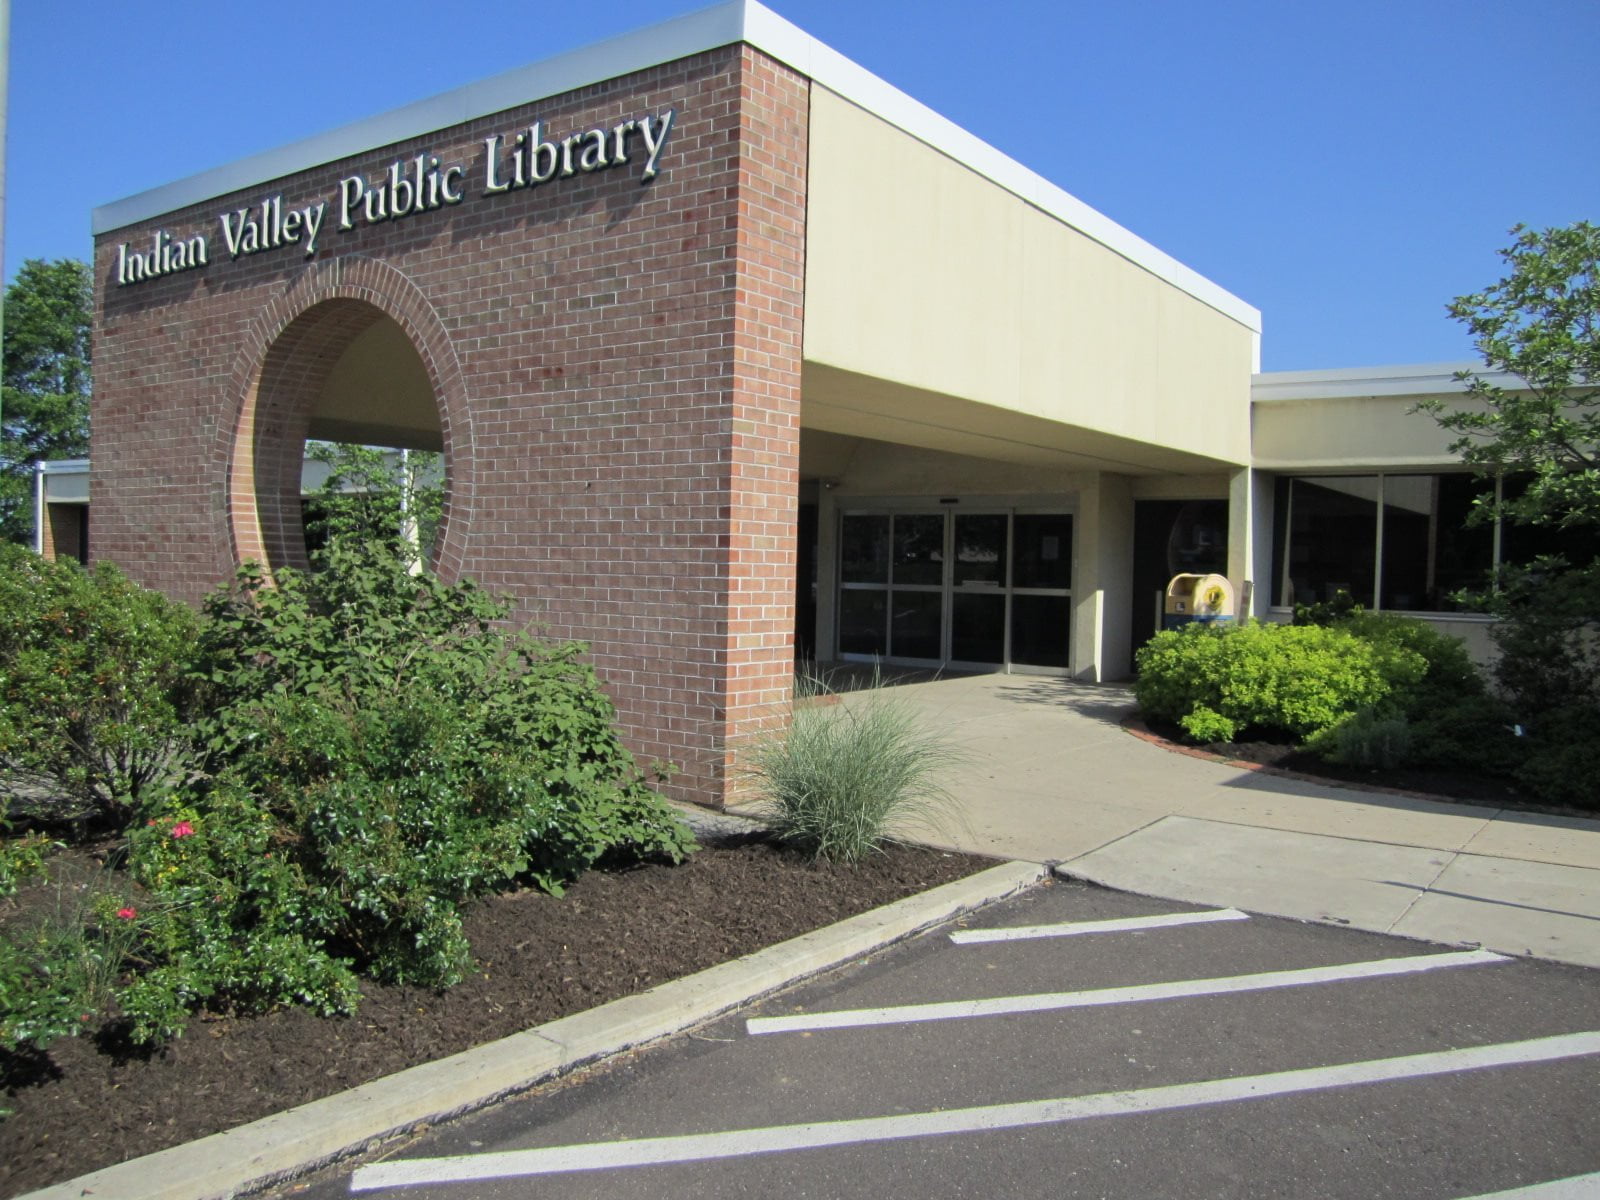 Indian Valley Public Library